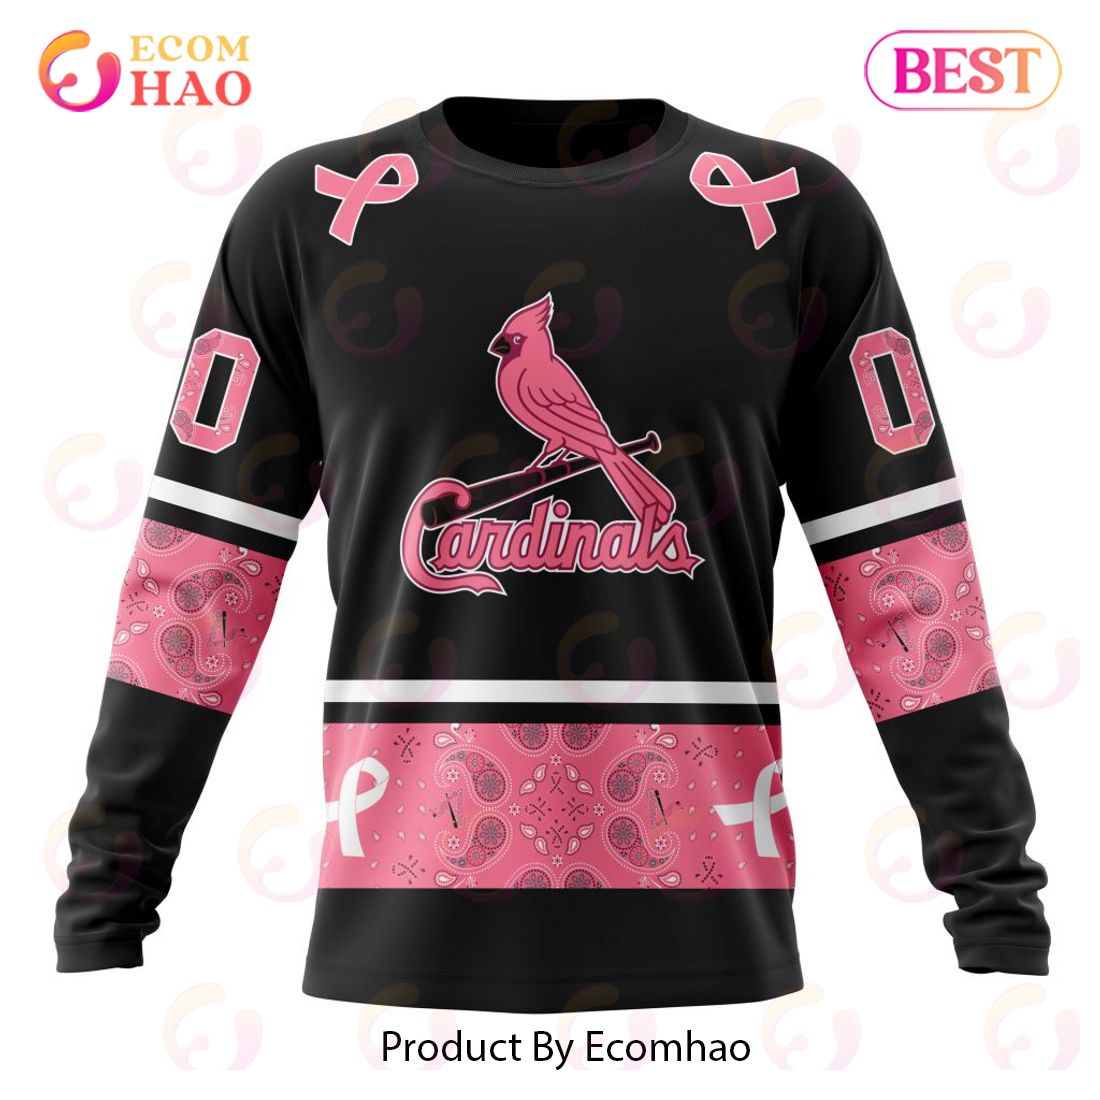 St Louis Cardinals Shirts For Sale 3D Tantalizing Breast Cancer